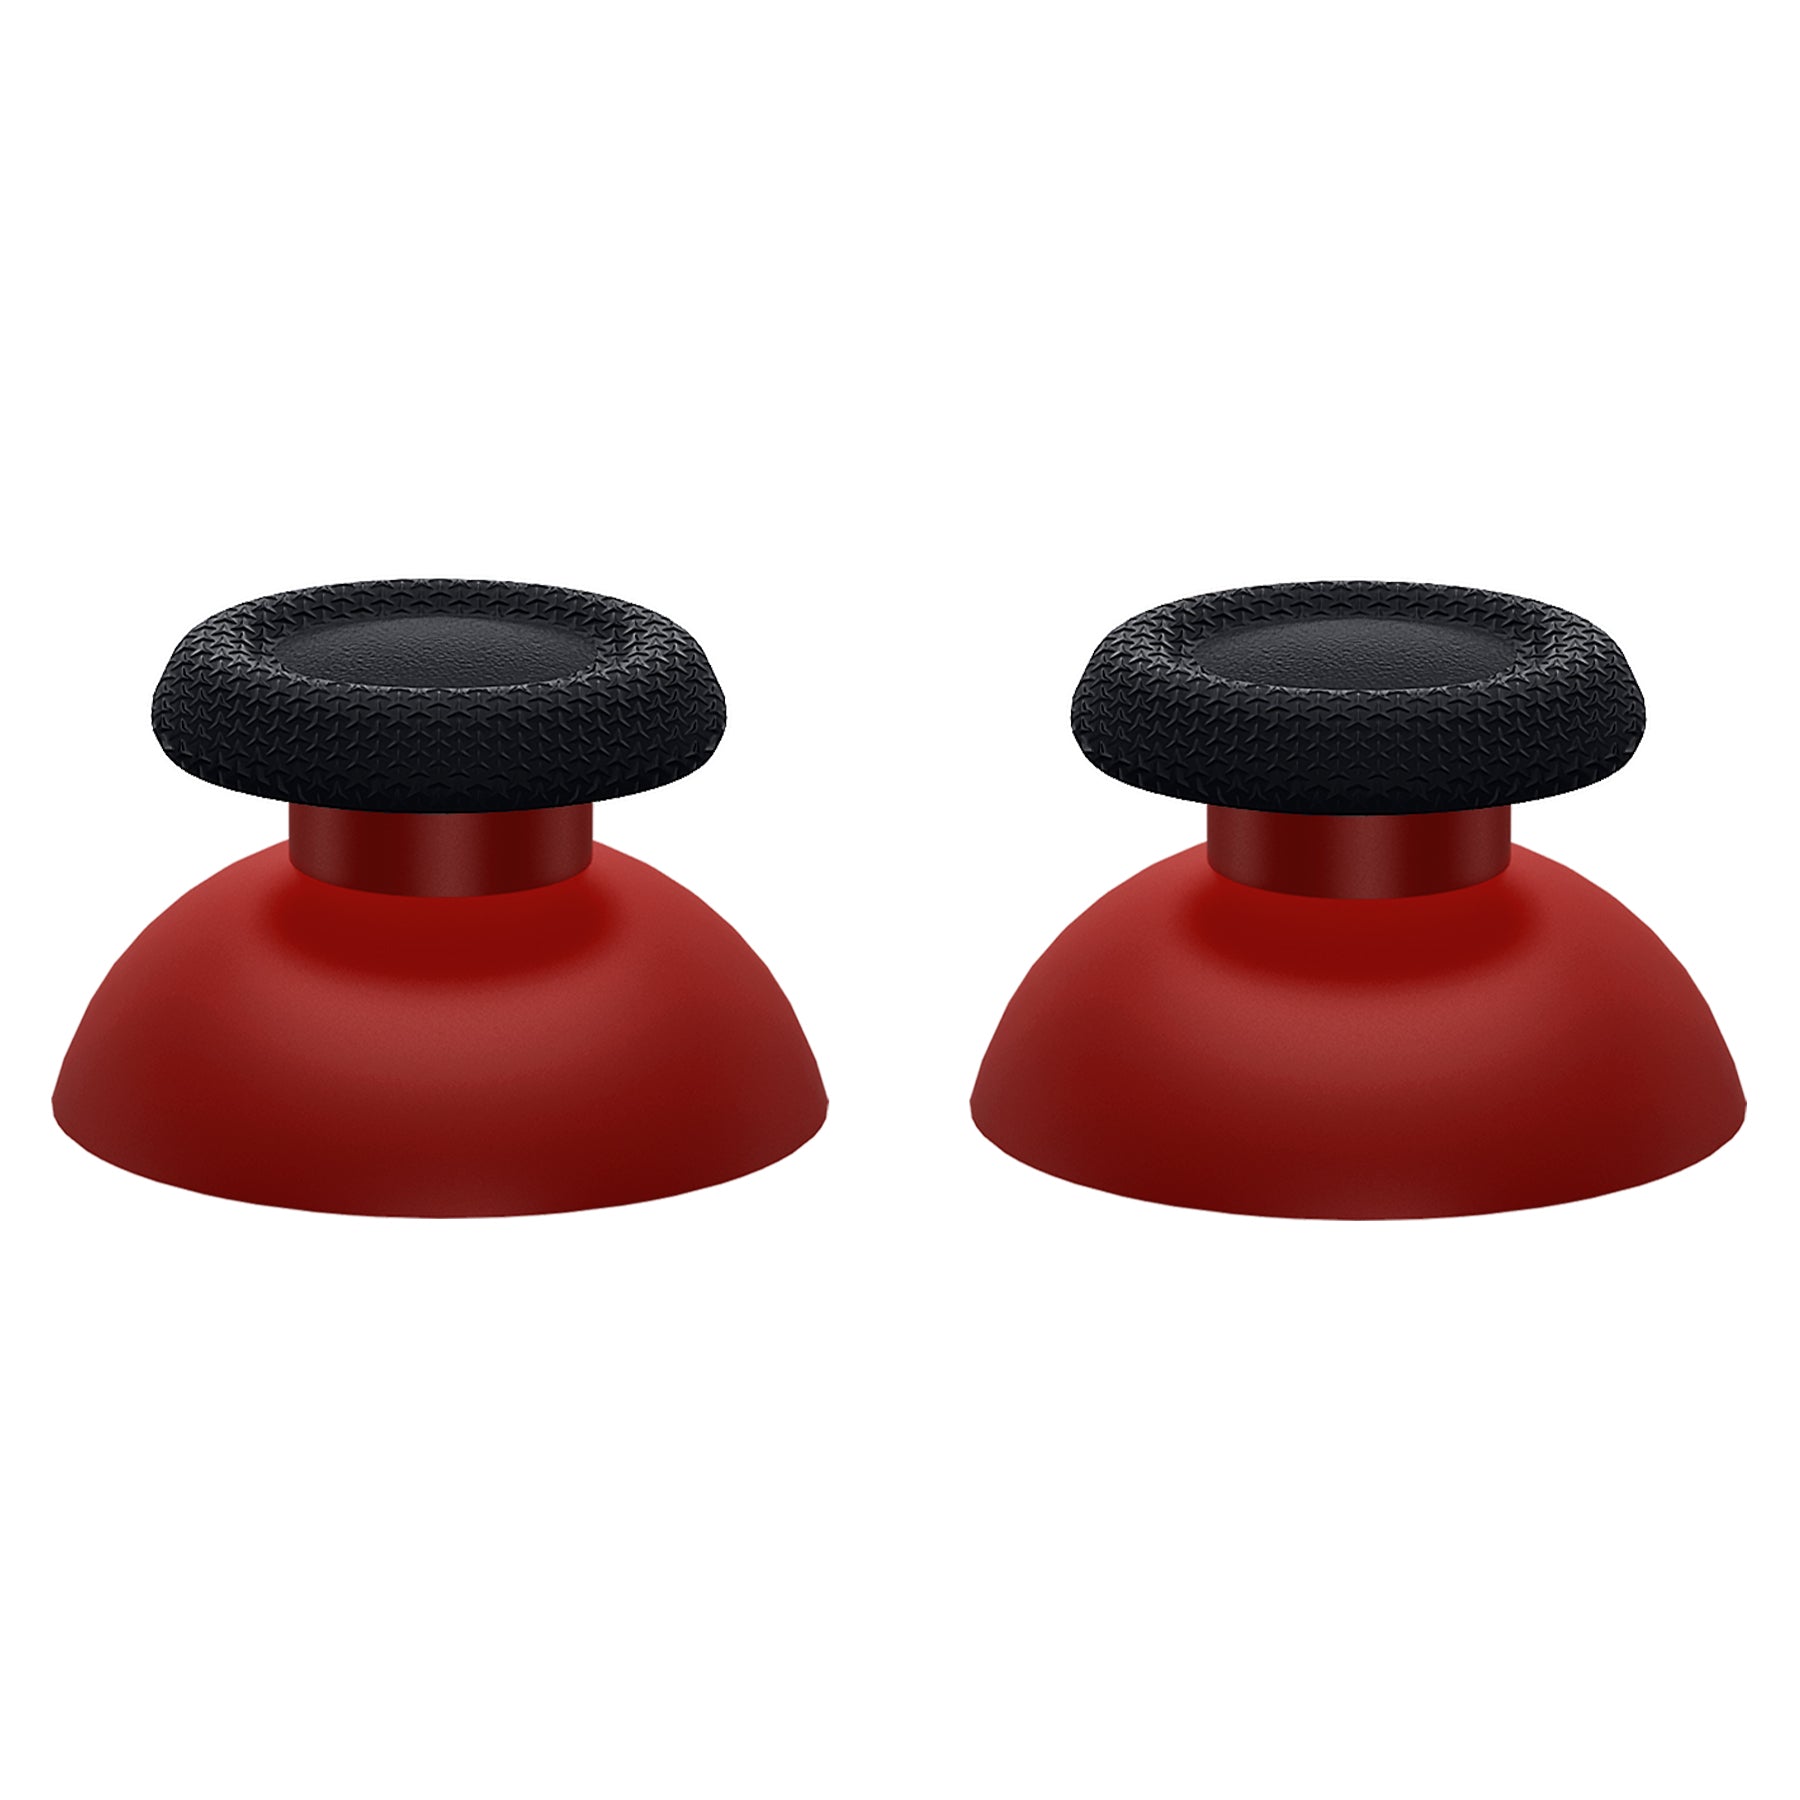 eXtremeRate Retail Carmine Red & Black Dual-Color Replacement Thumbsticks for PS5 Controller, Custom Analog Stick Joystick Compatible with PS5, for PS4 All Model Controller - JPF633